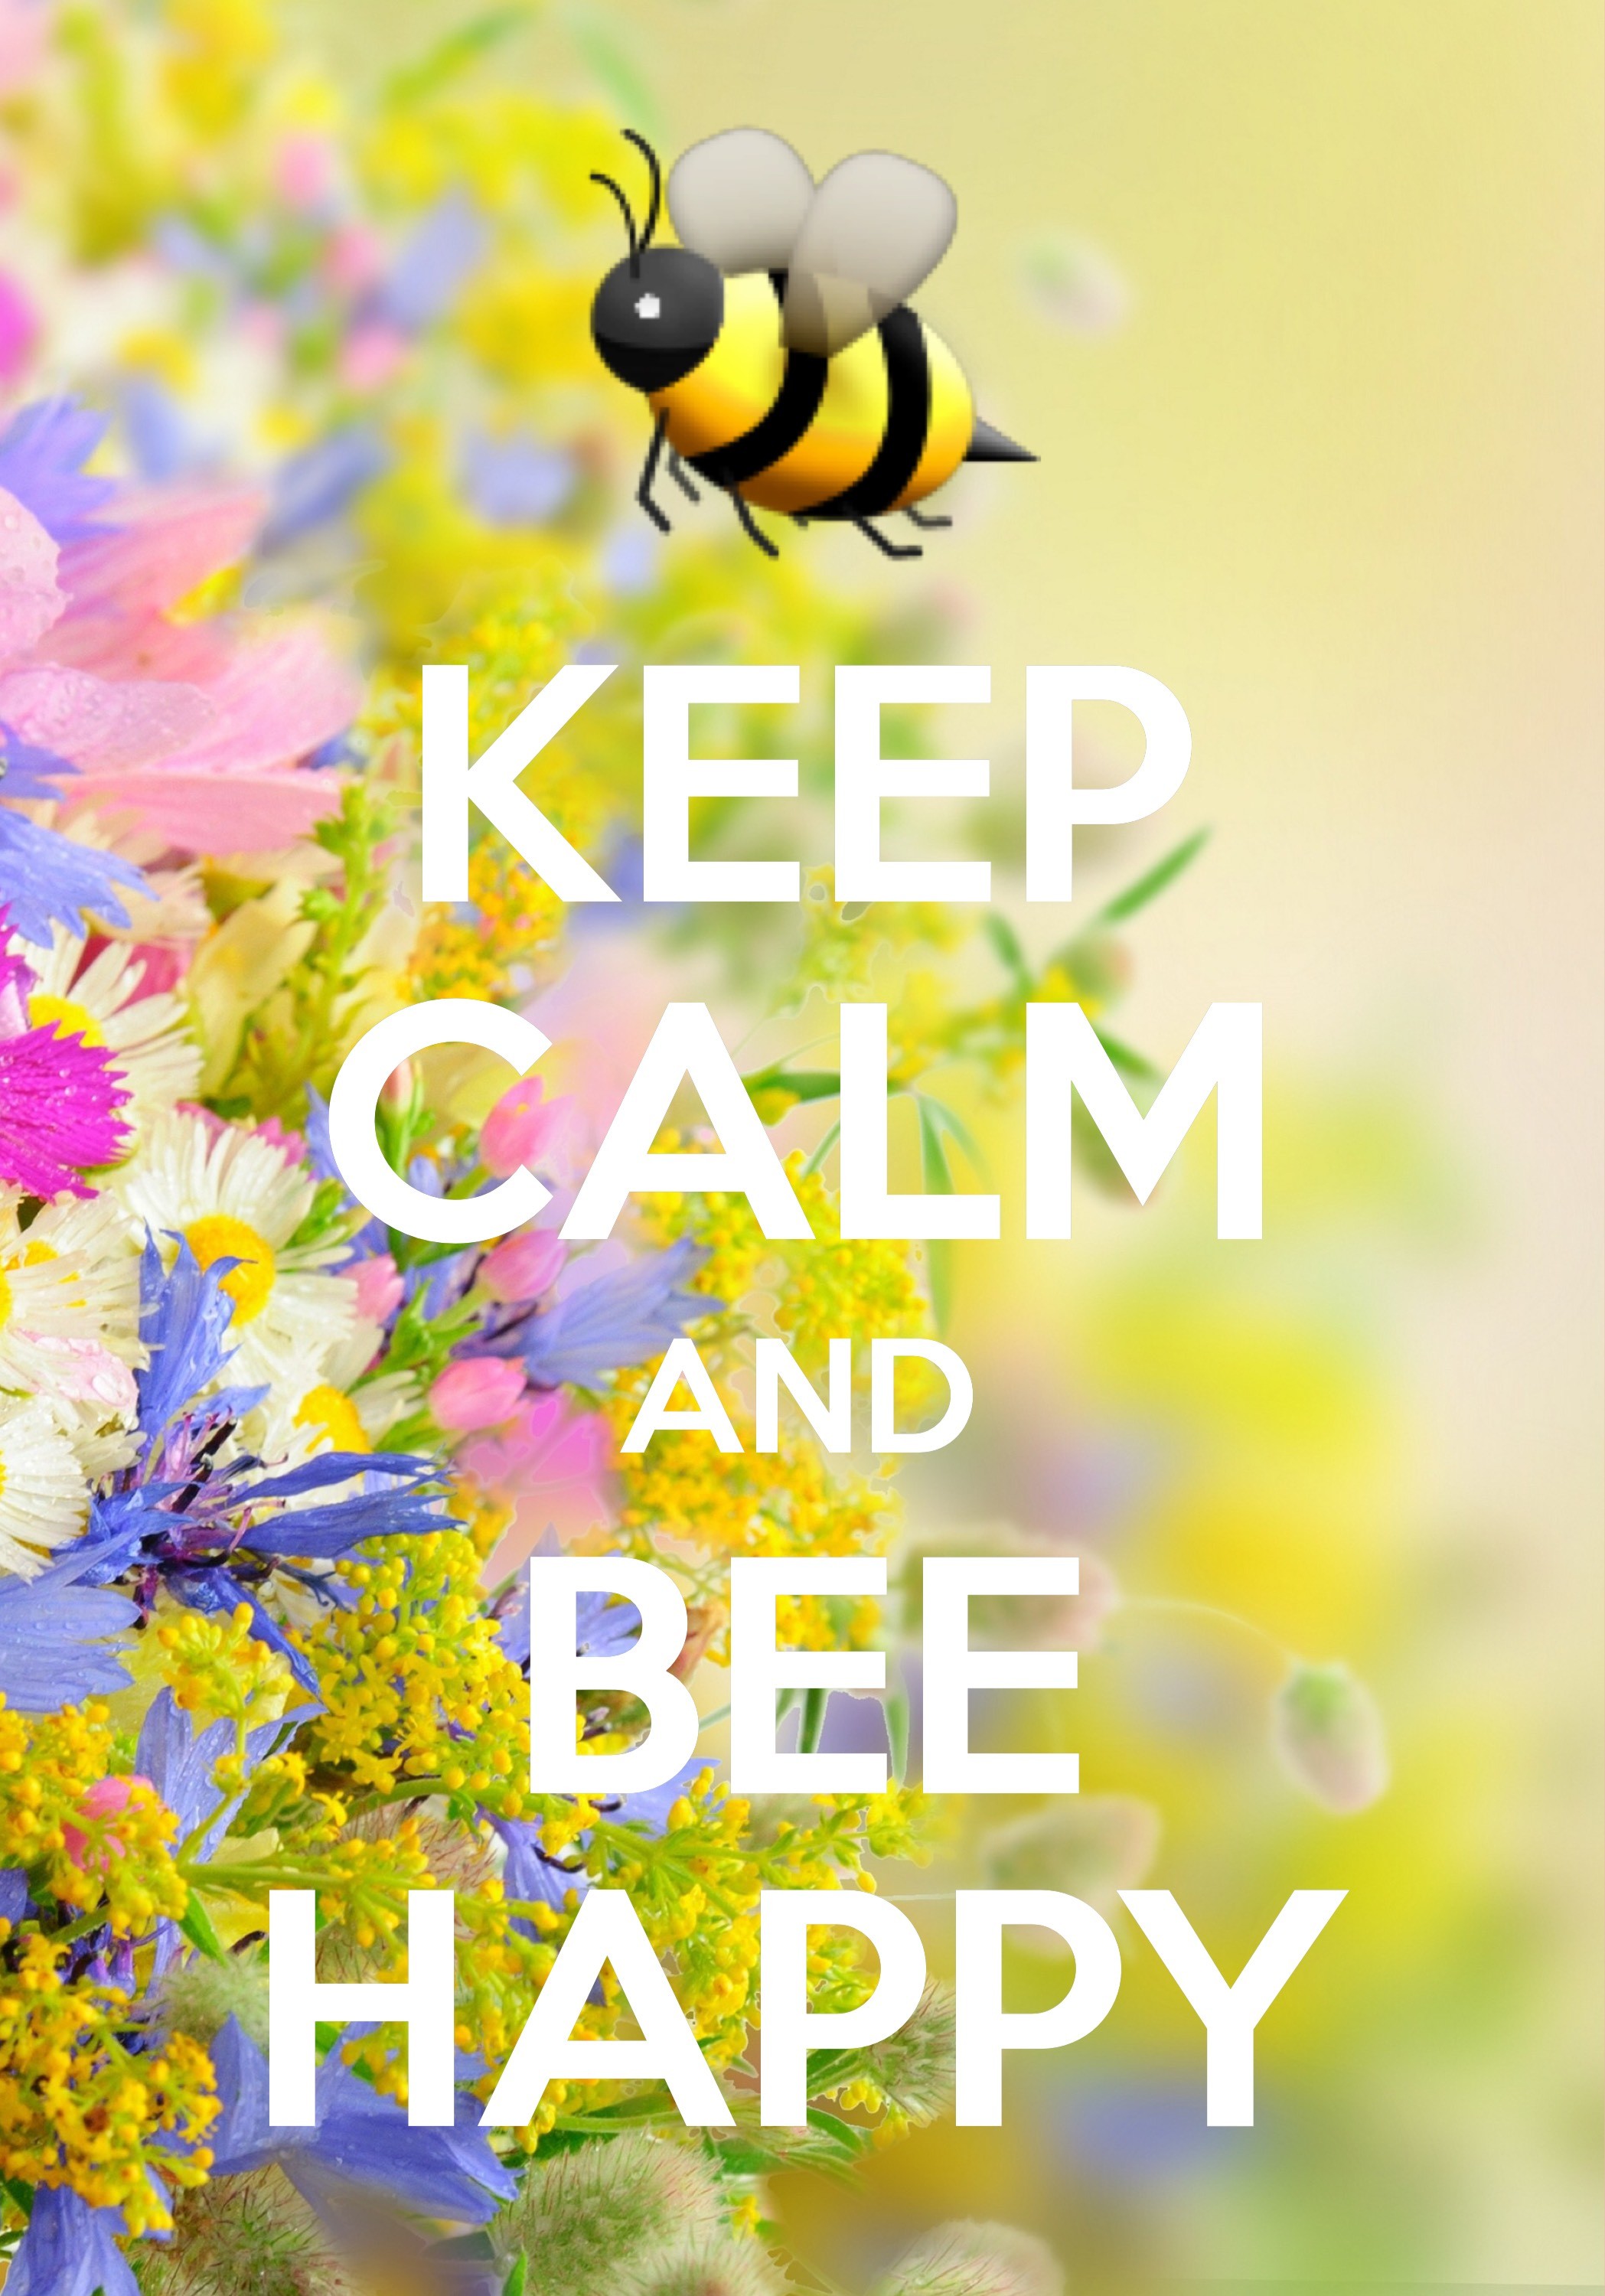 Explore Keep Calm Quotes, Keep Calm Posters, And More Happy Quotes